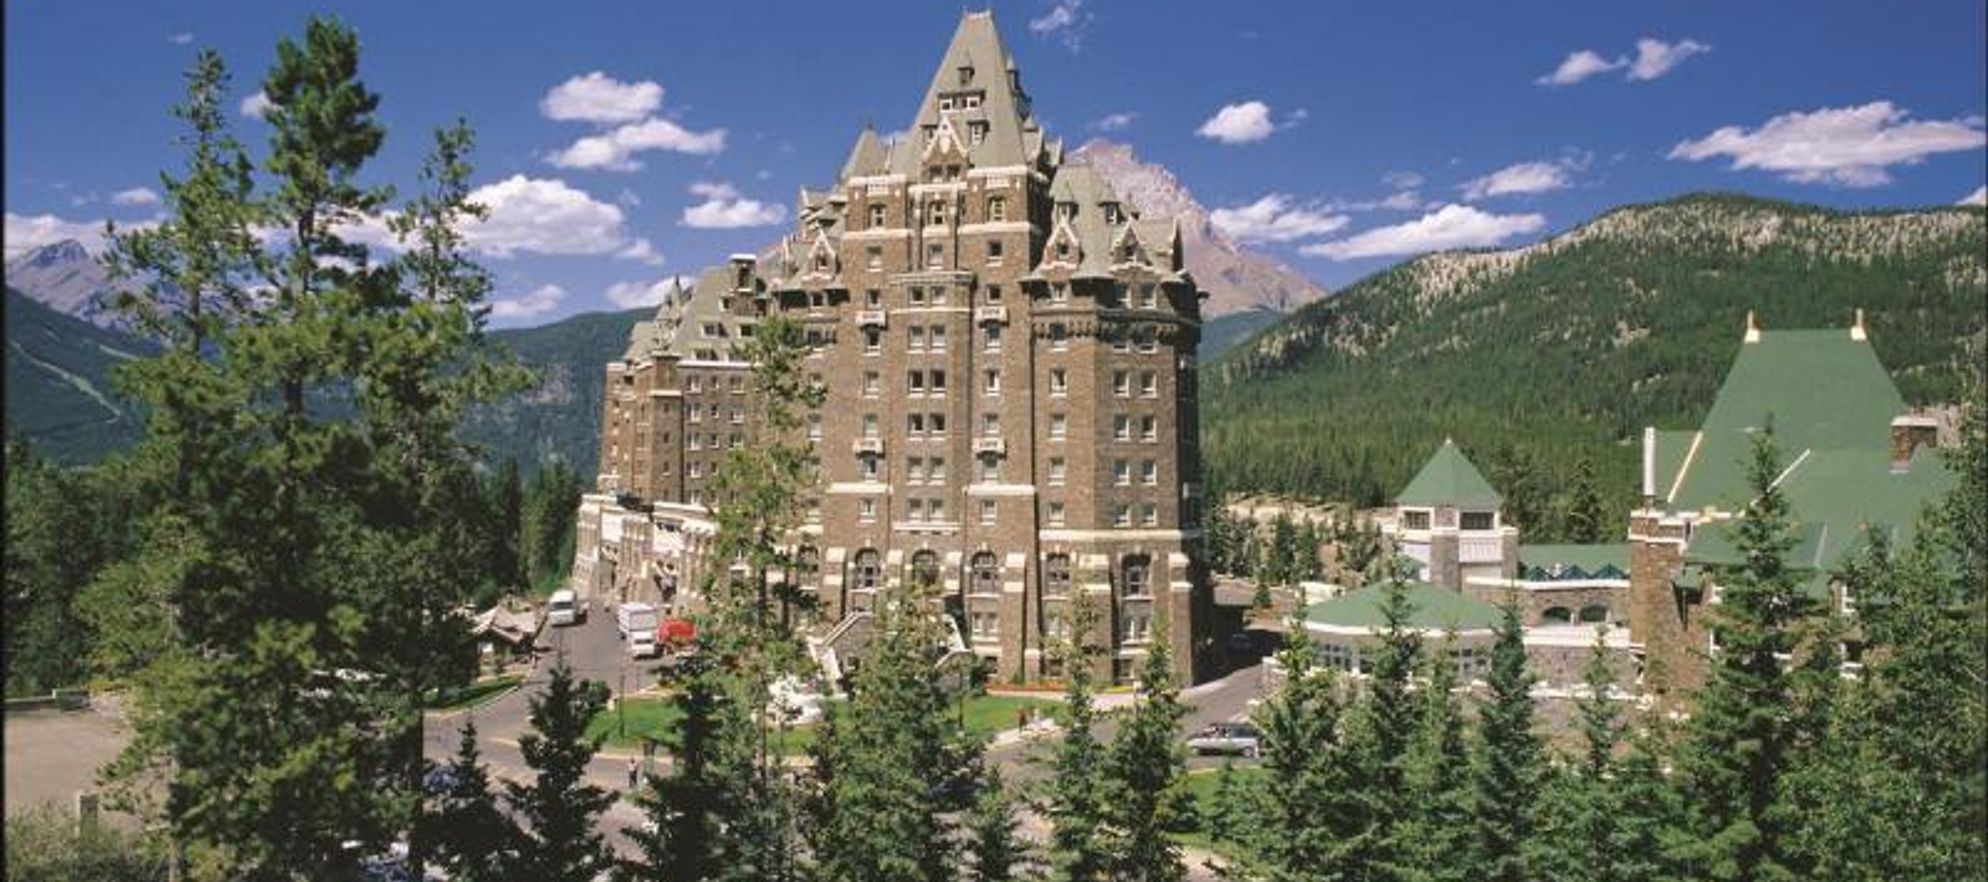 Eat the Castle - Banff Canmore Food Tours (A division of Alberta Food Tours Inc)